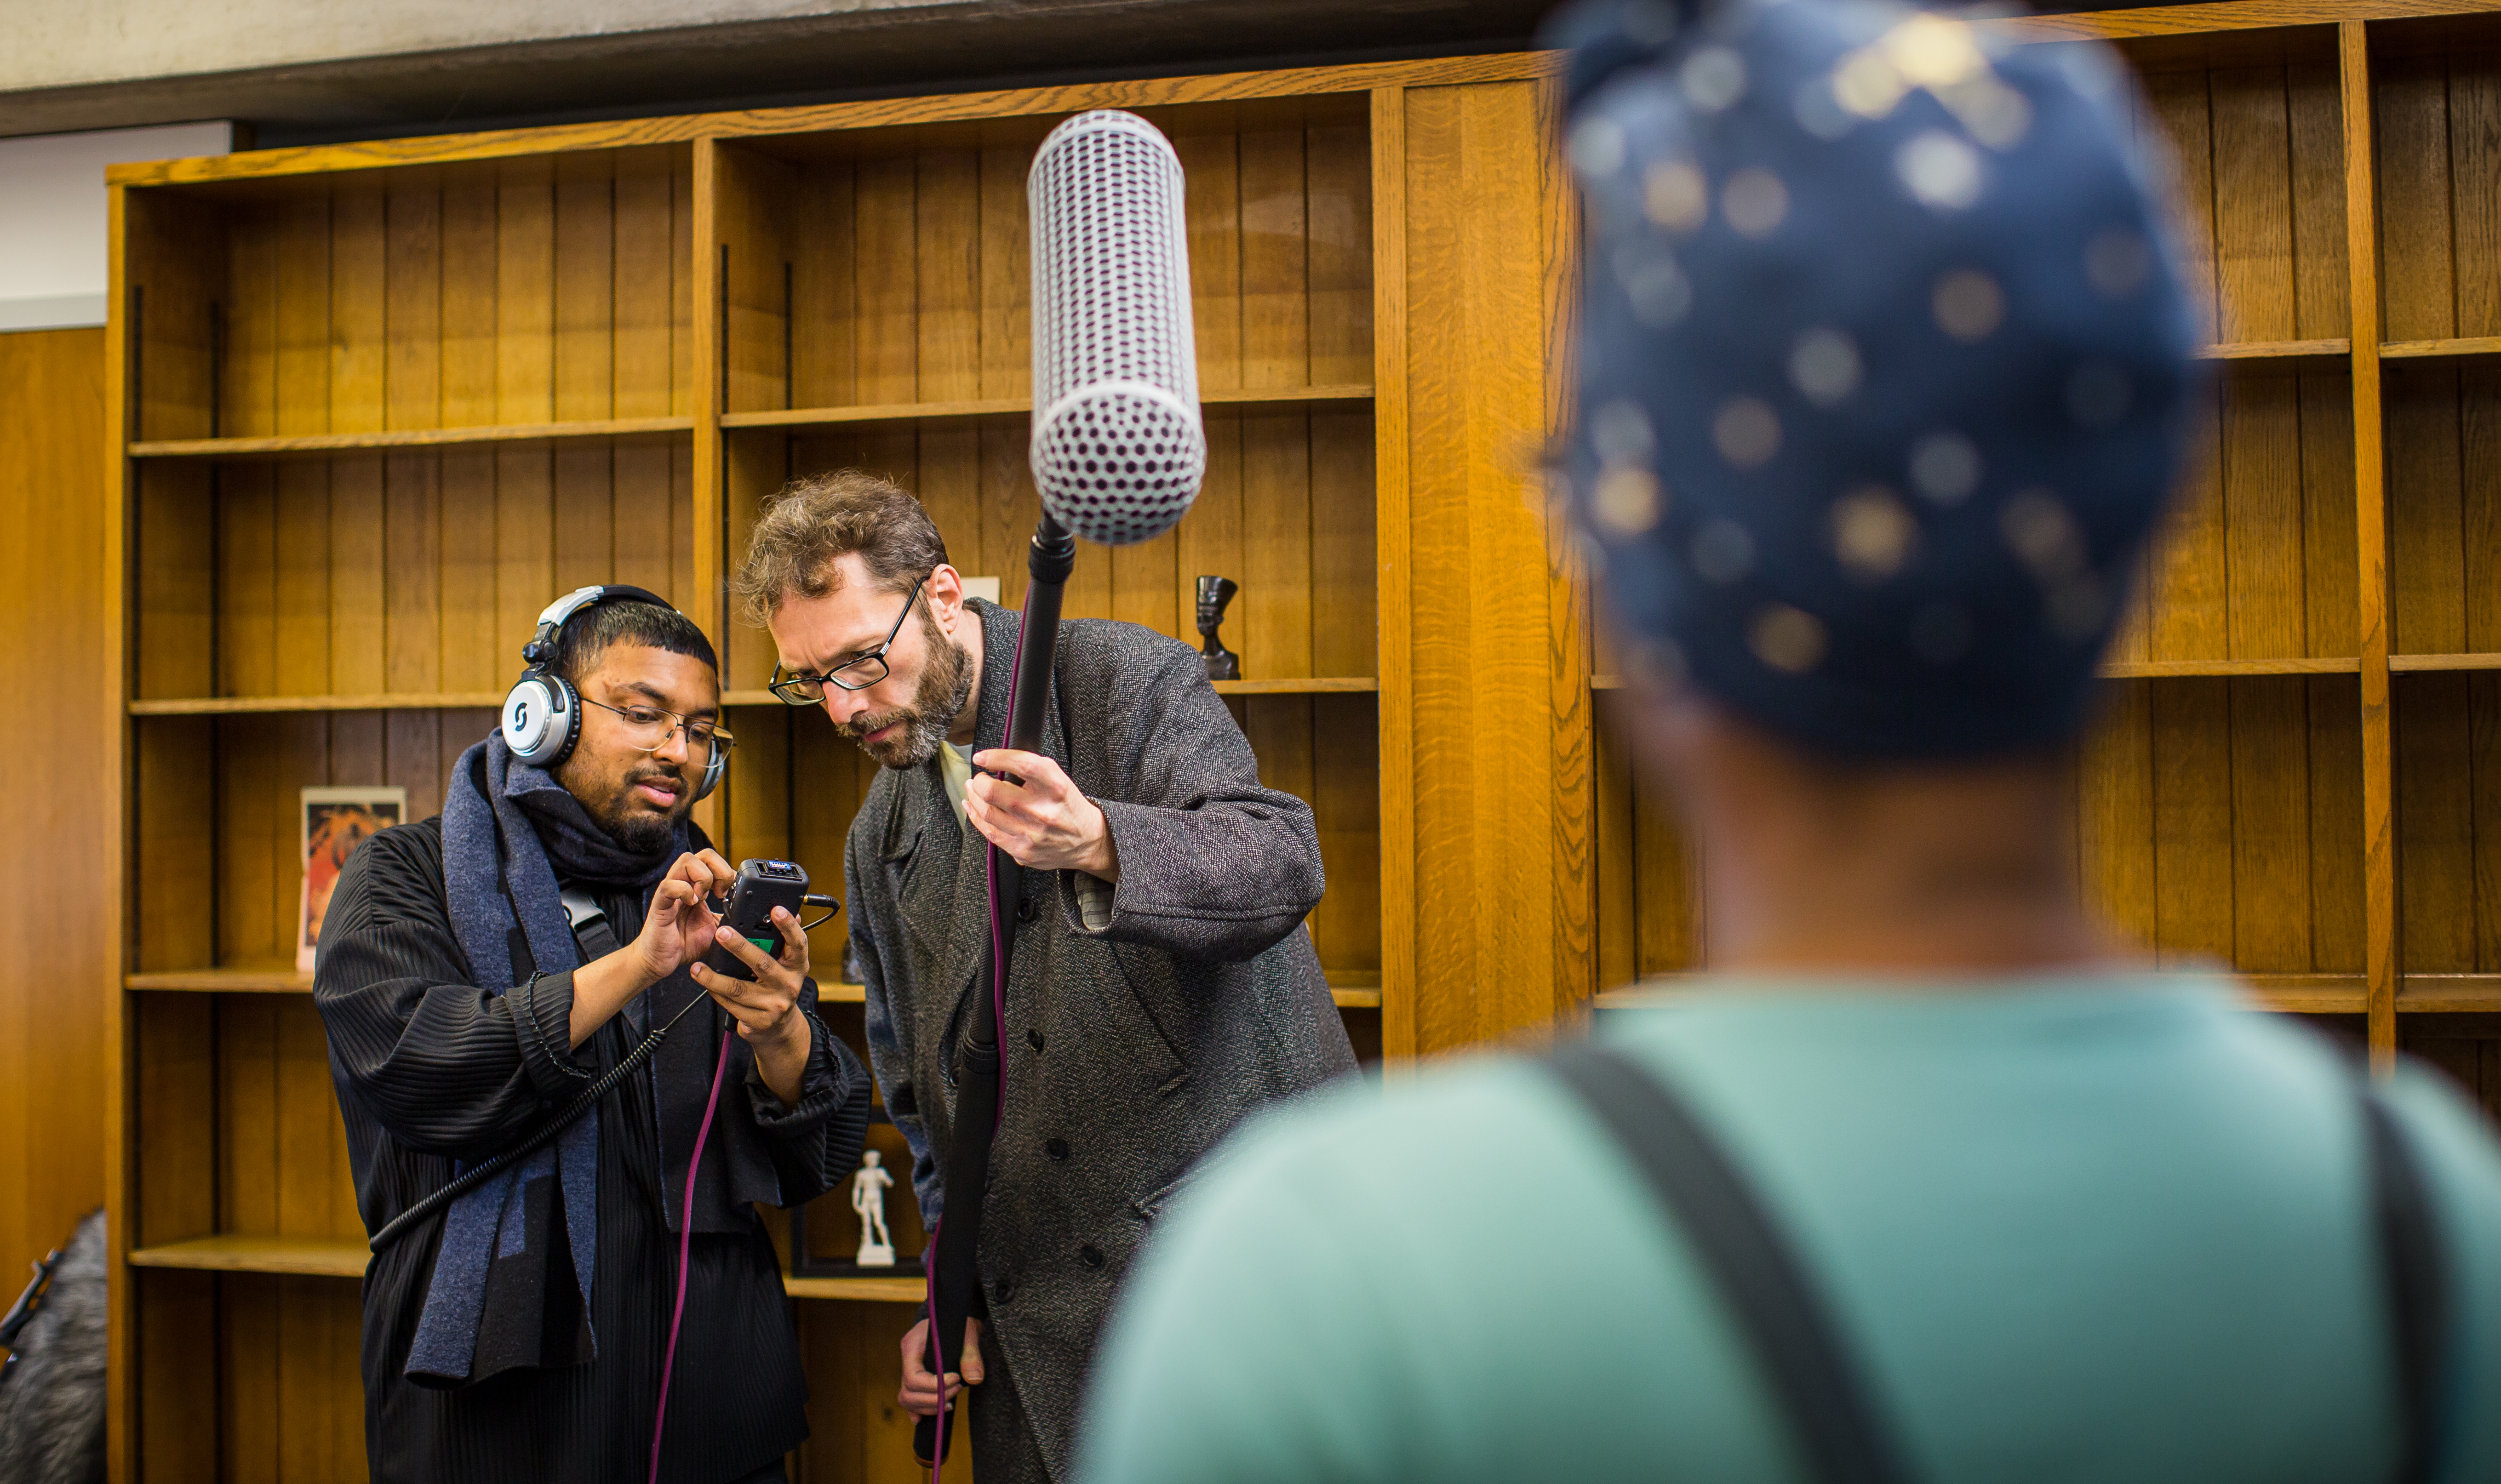 Student receives training in sound recording on set as part of film skills bootcamp